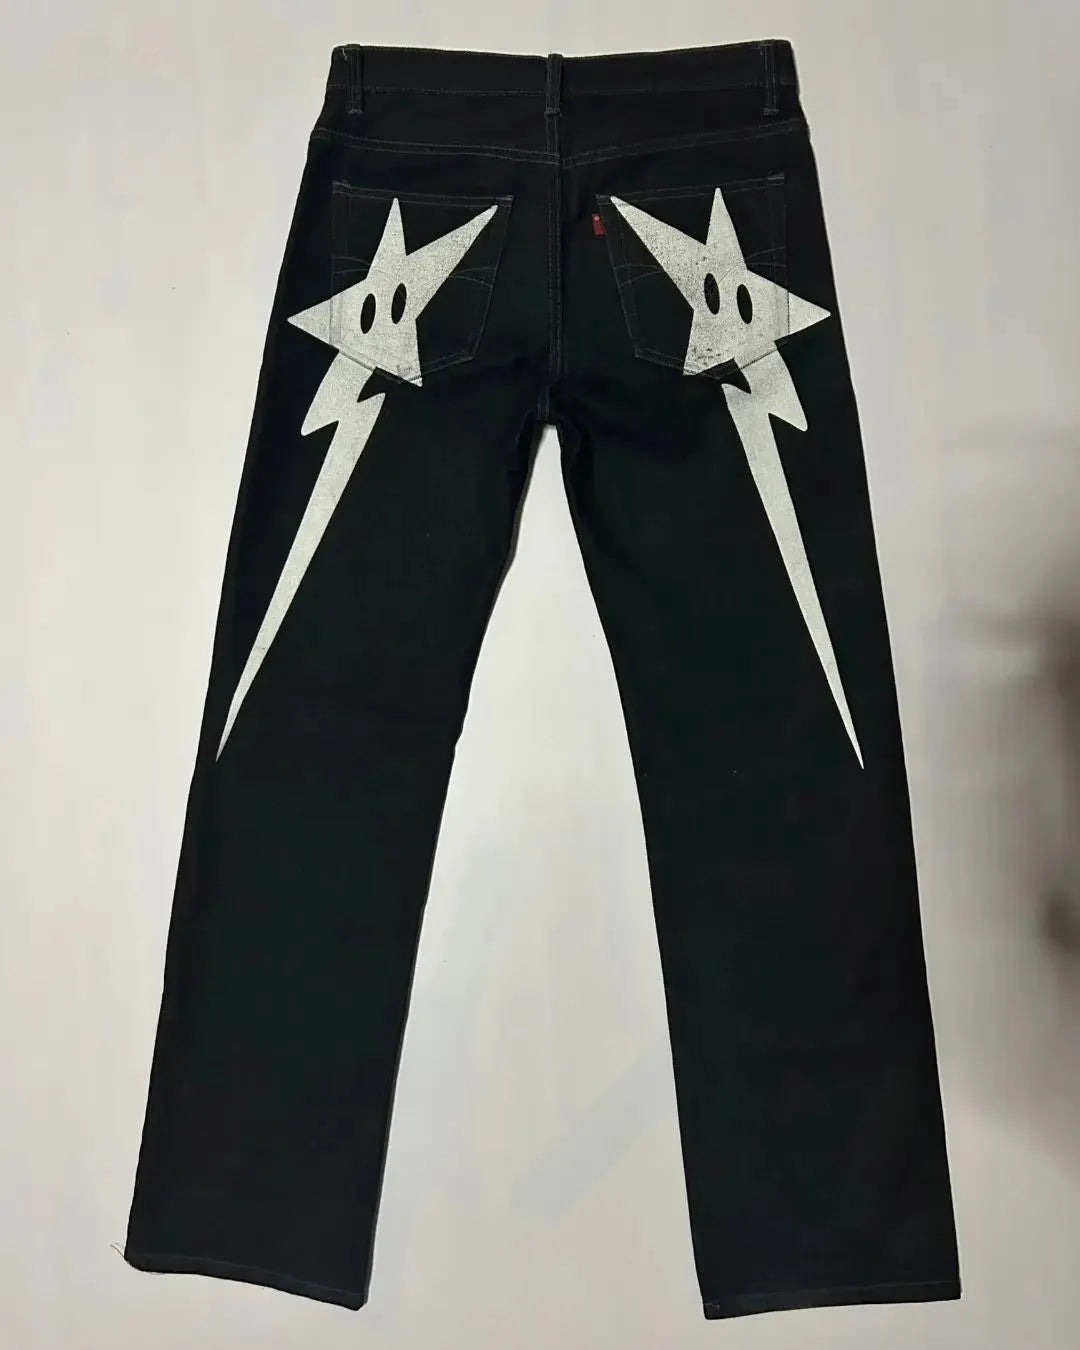 Womens Grey Stars Gothic Pants  Fashion outfits, Aesthetic clothes,  Fashion inspo outfits